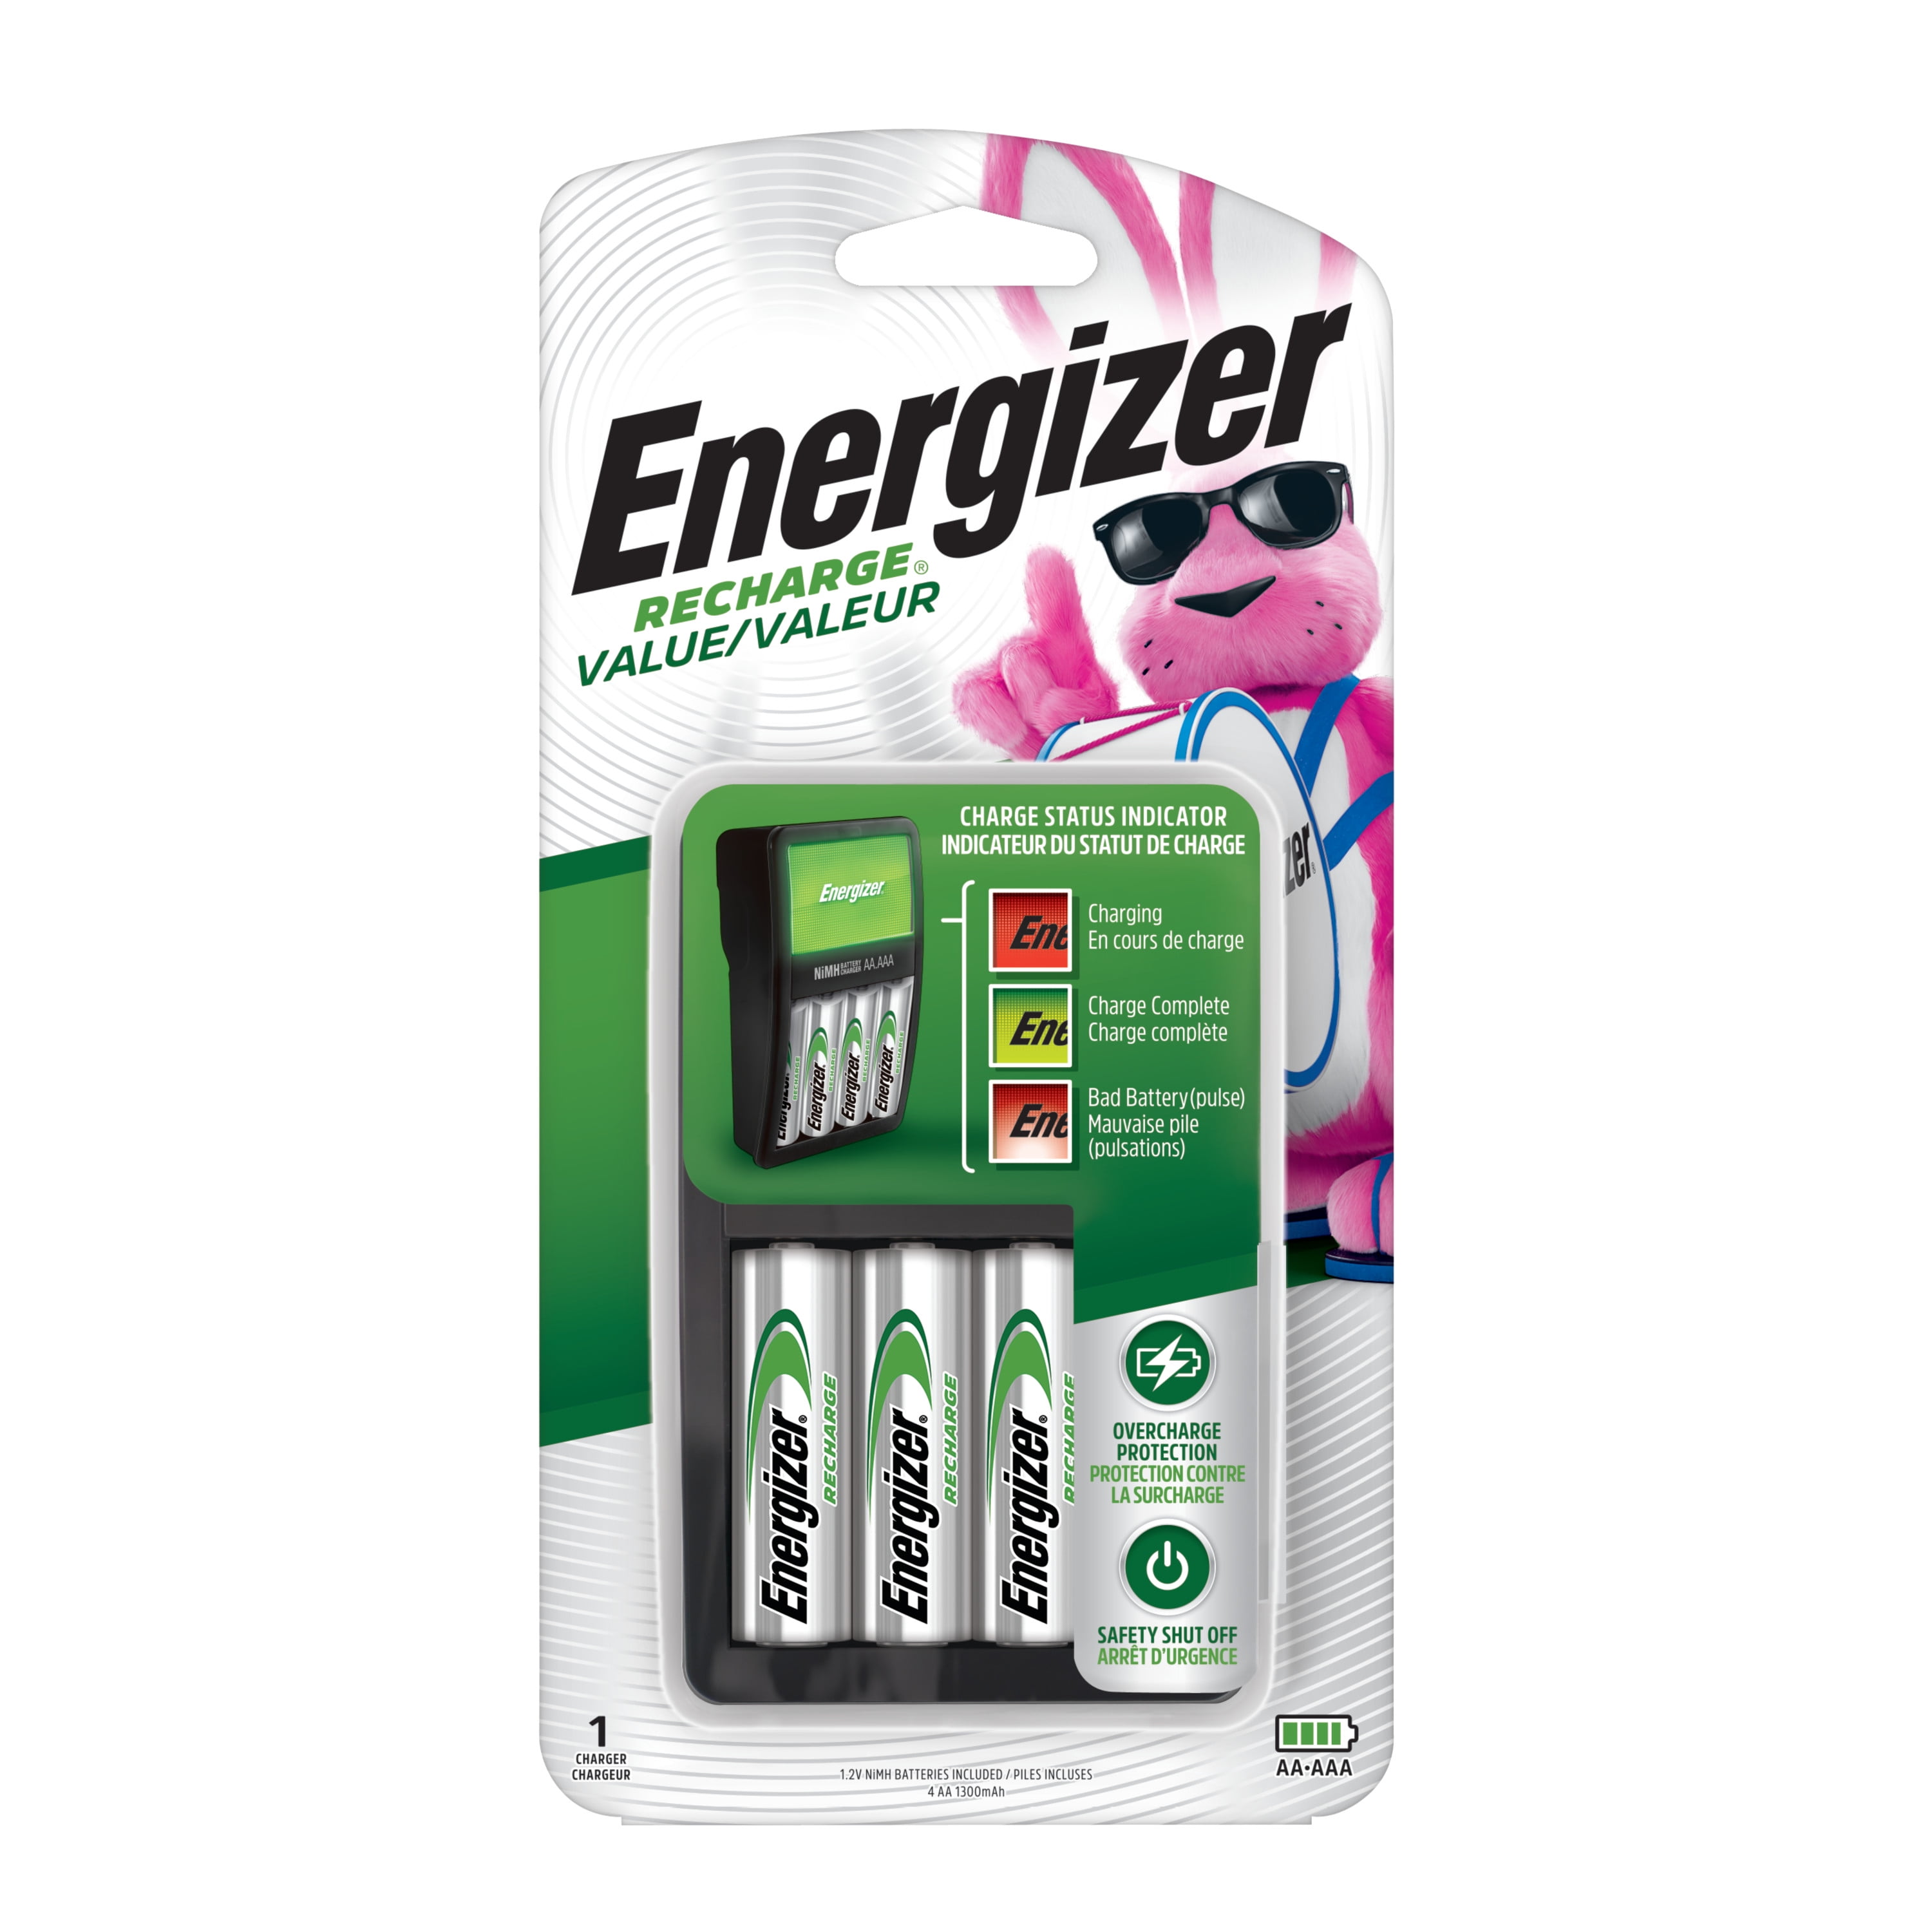 Energizer Recharge Value Charger for NiMH Rechargeable AA Batteries -